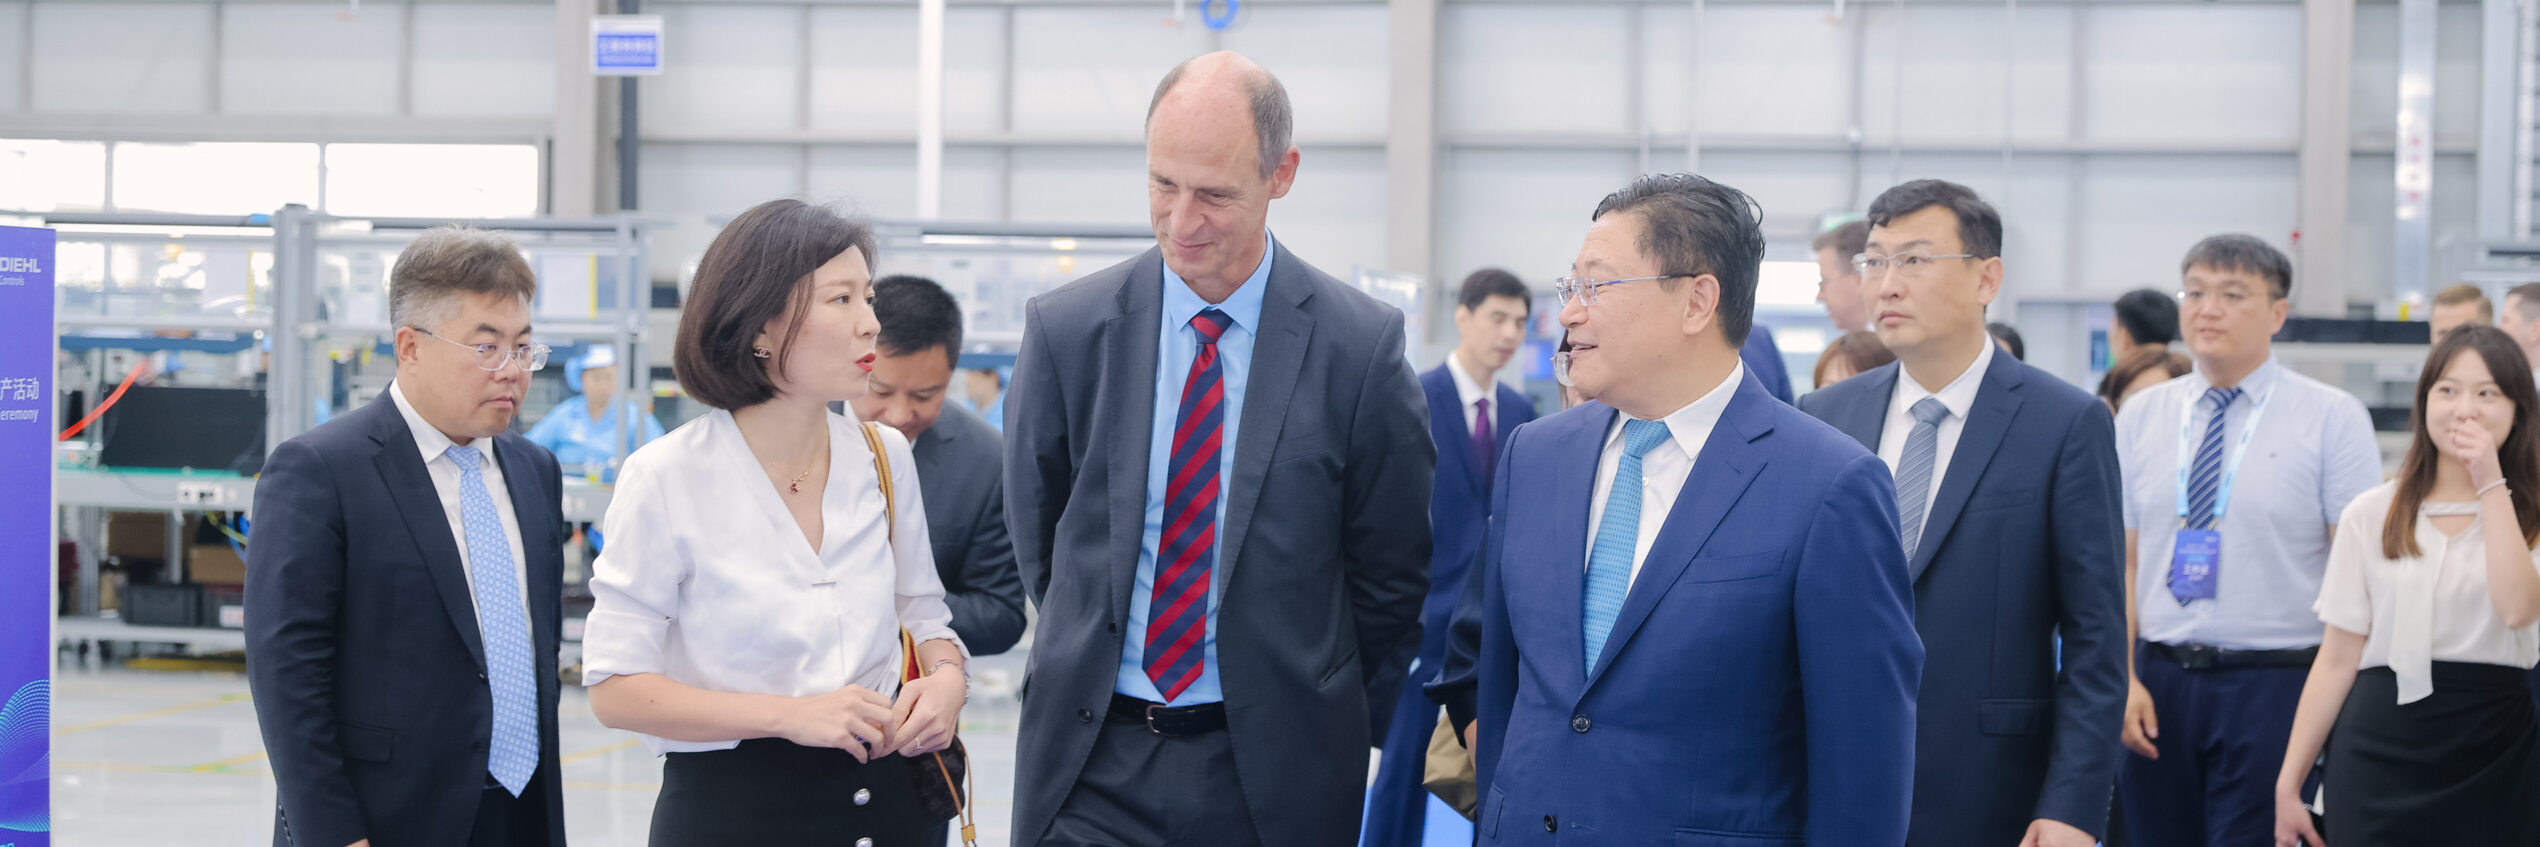 Diehl Controls opens new plant in China 